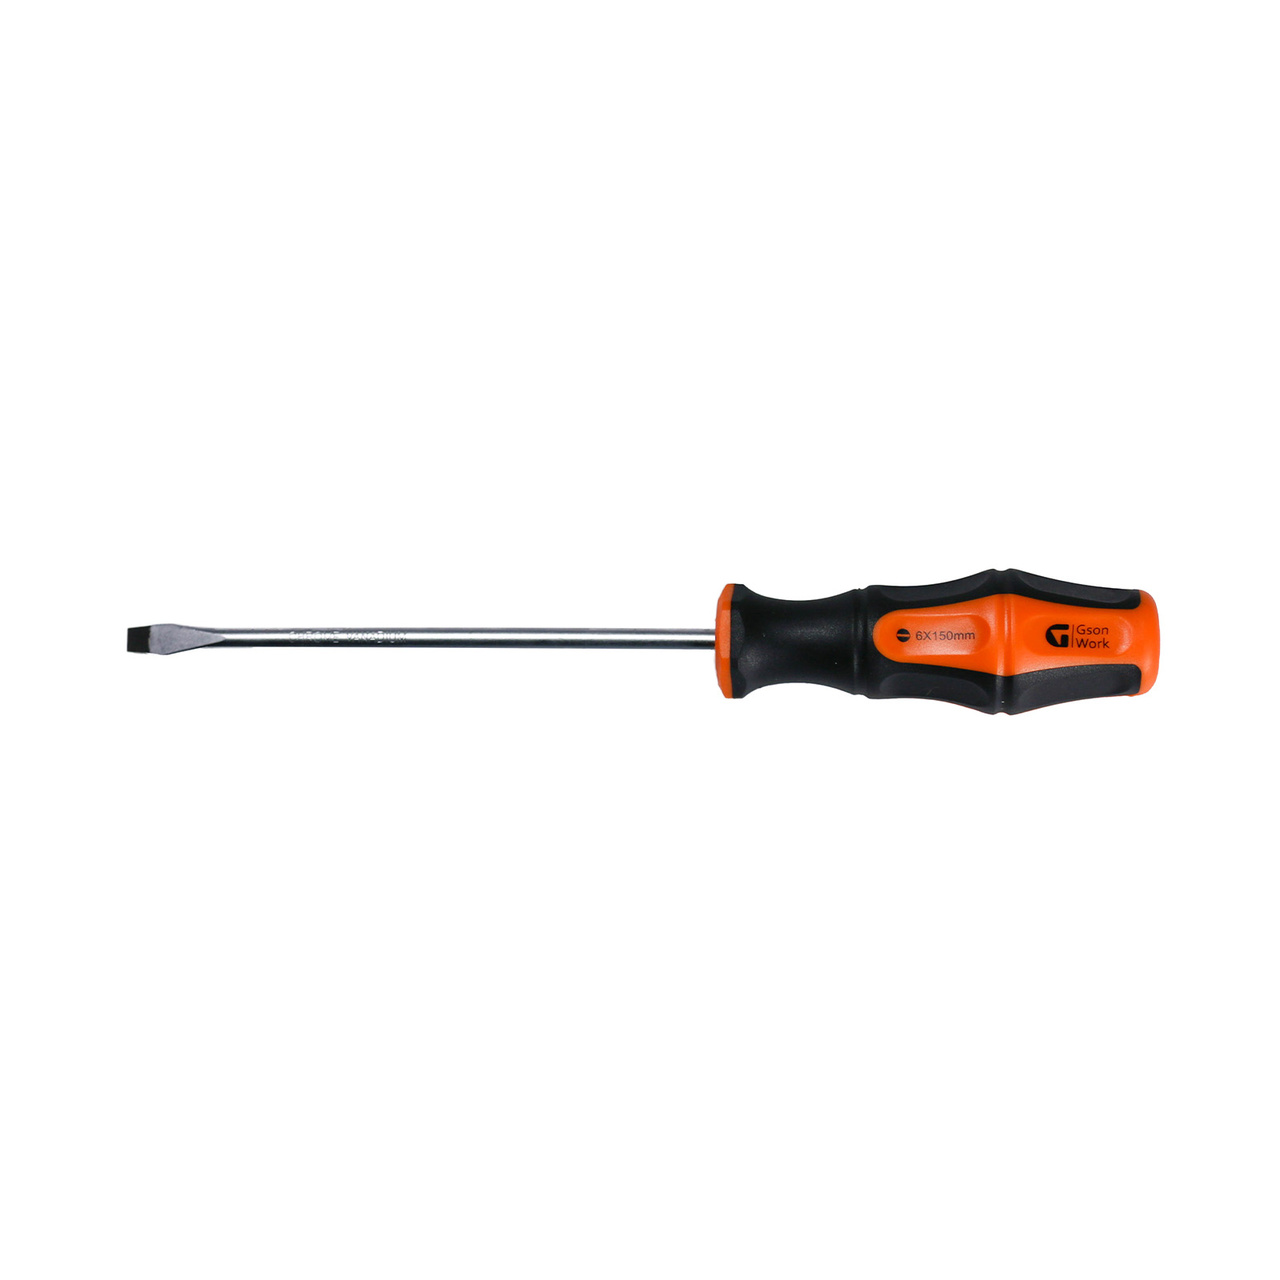 Slotted Screwdriver 6 x 150 mm